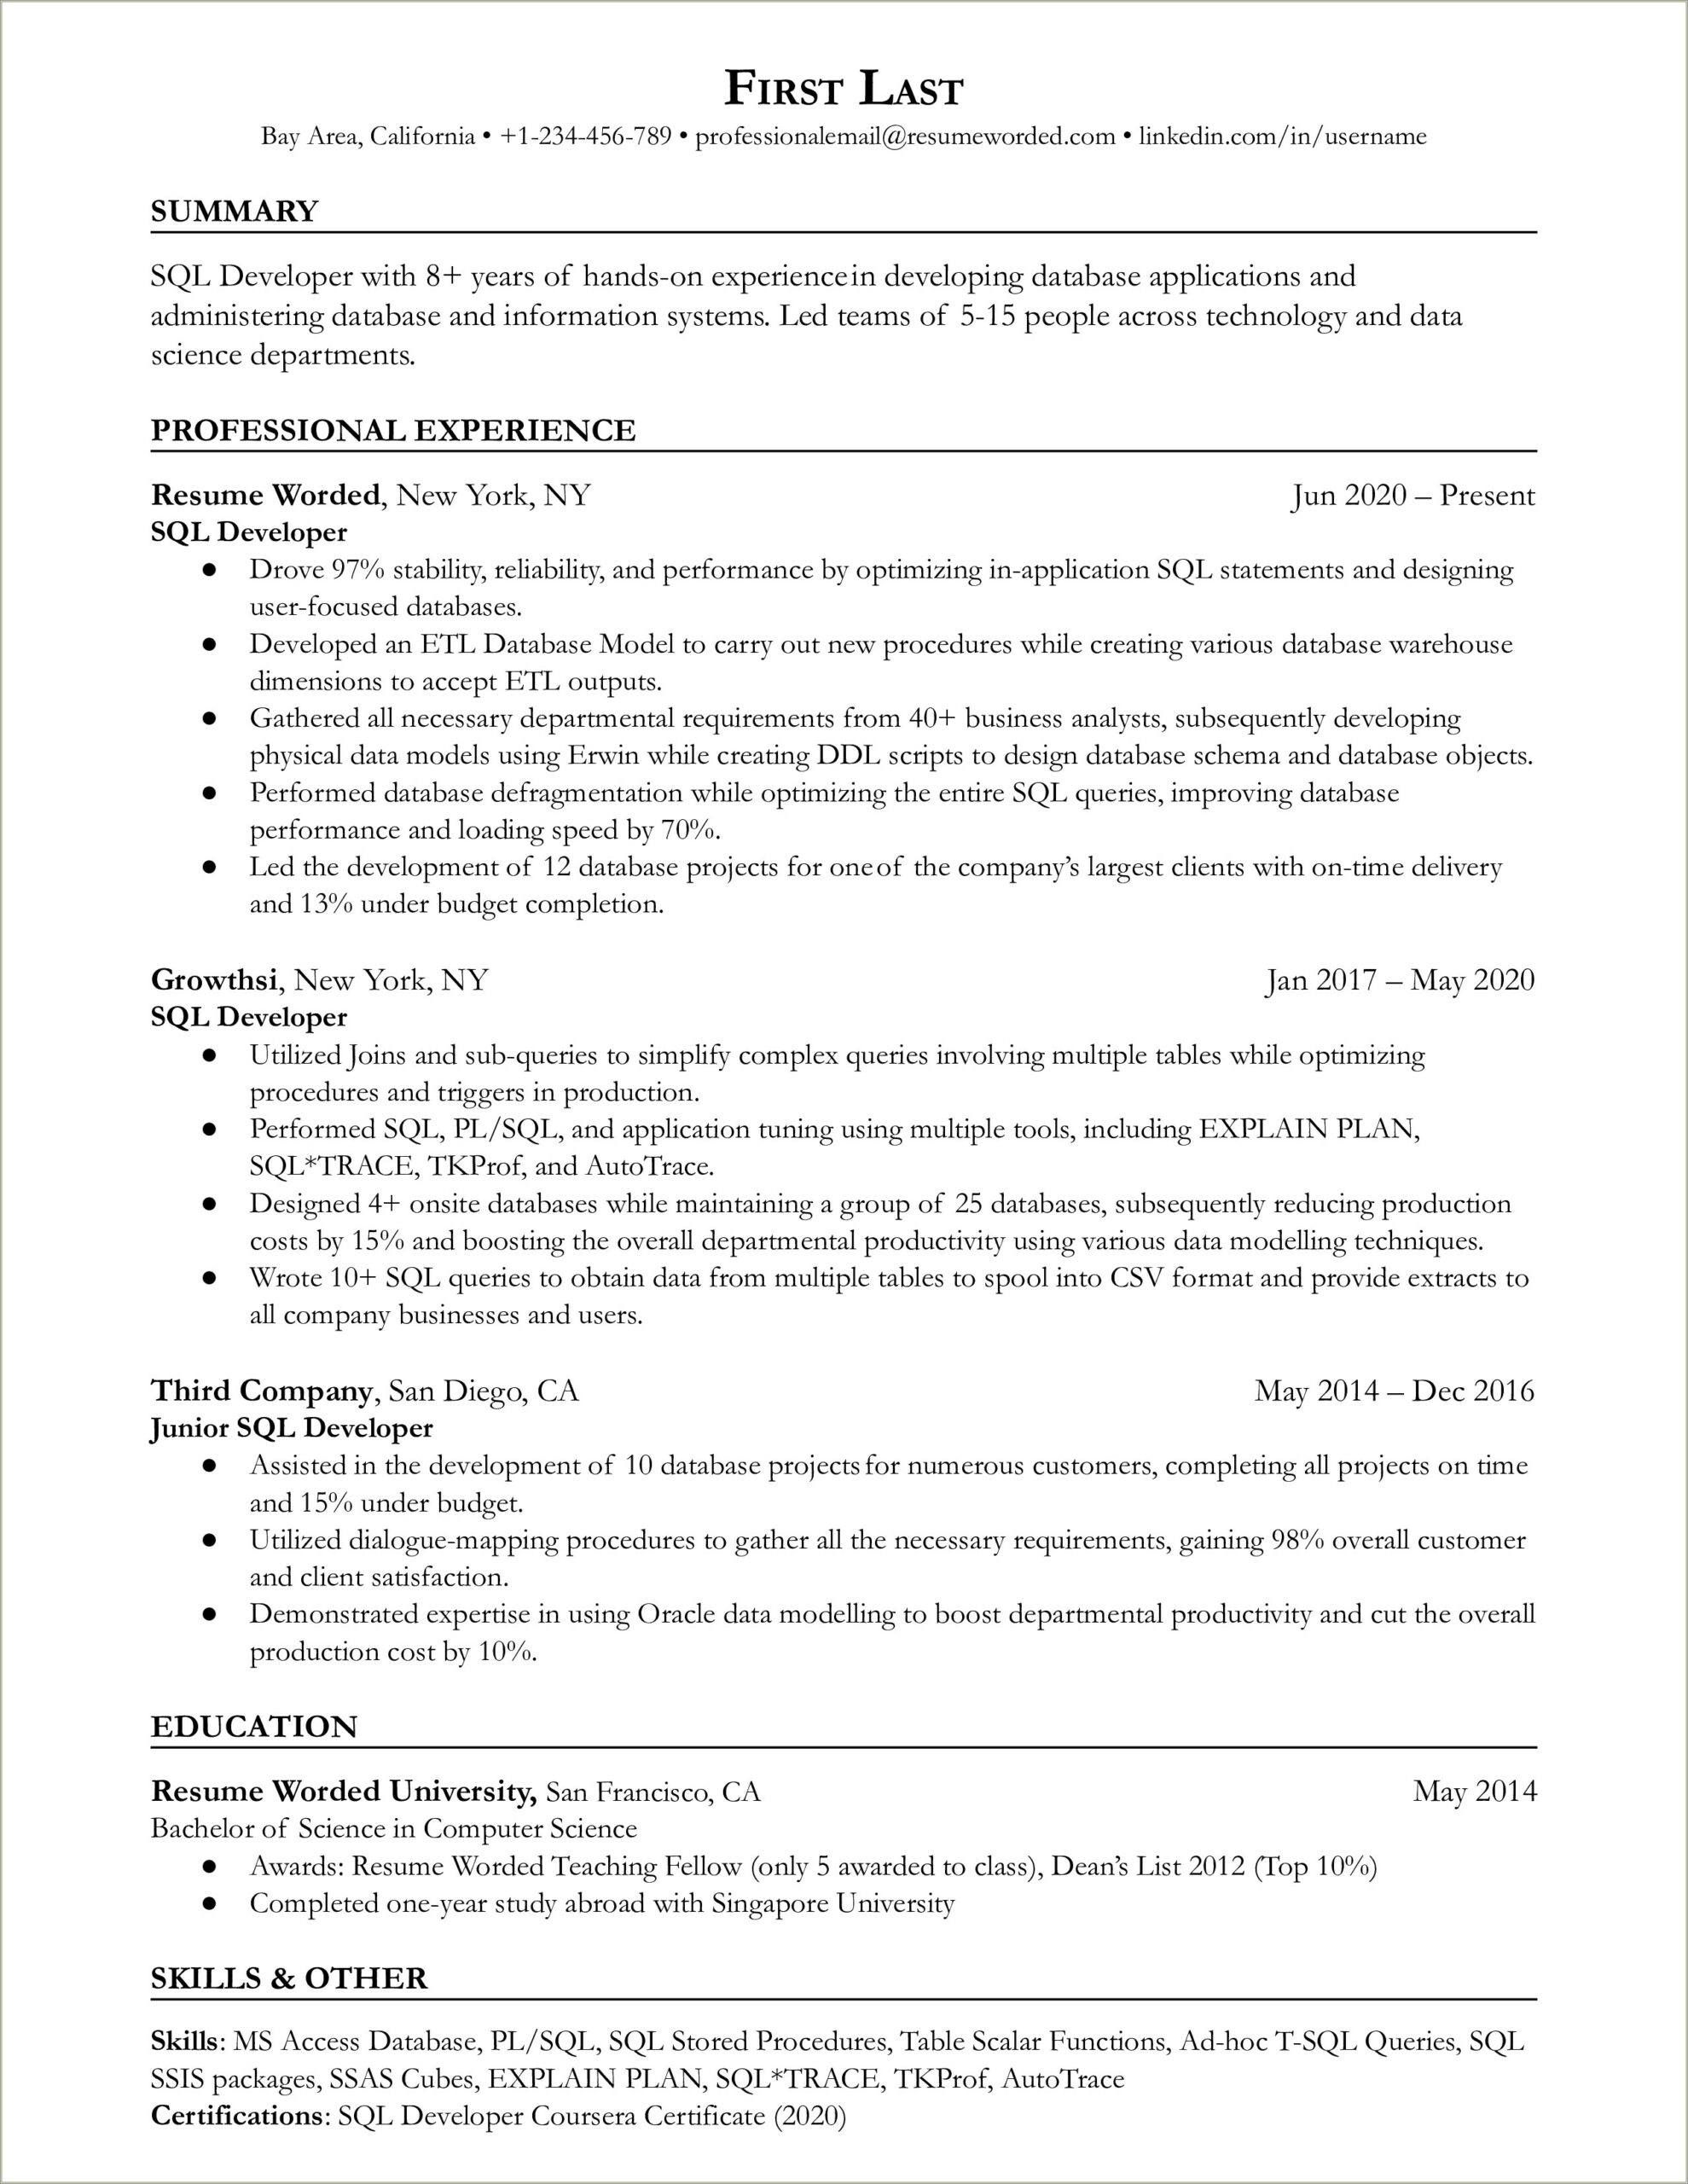 1 Year Experience Resume Format For Sql Developer